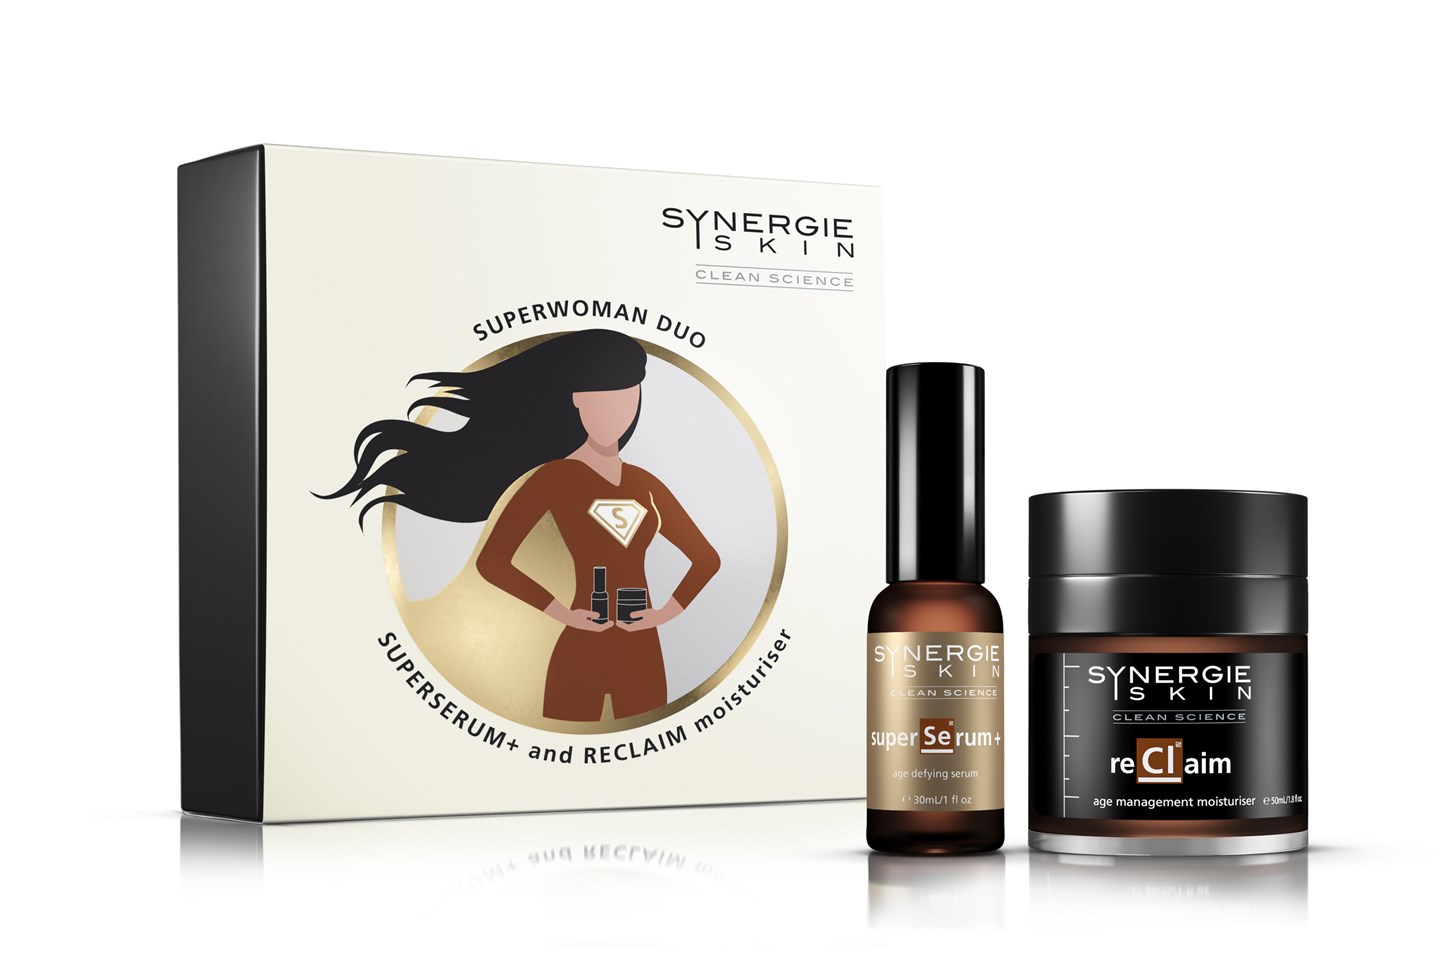 Synergie Skin Superwoman Duo (Superserum+ and Reclaim)